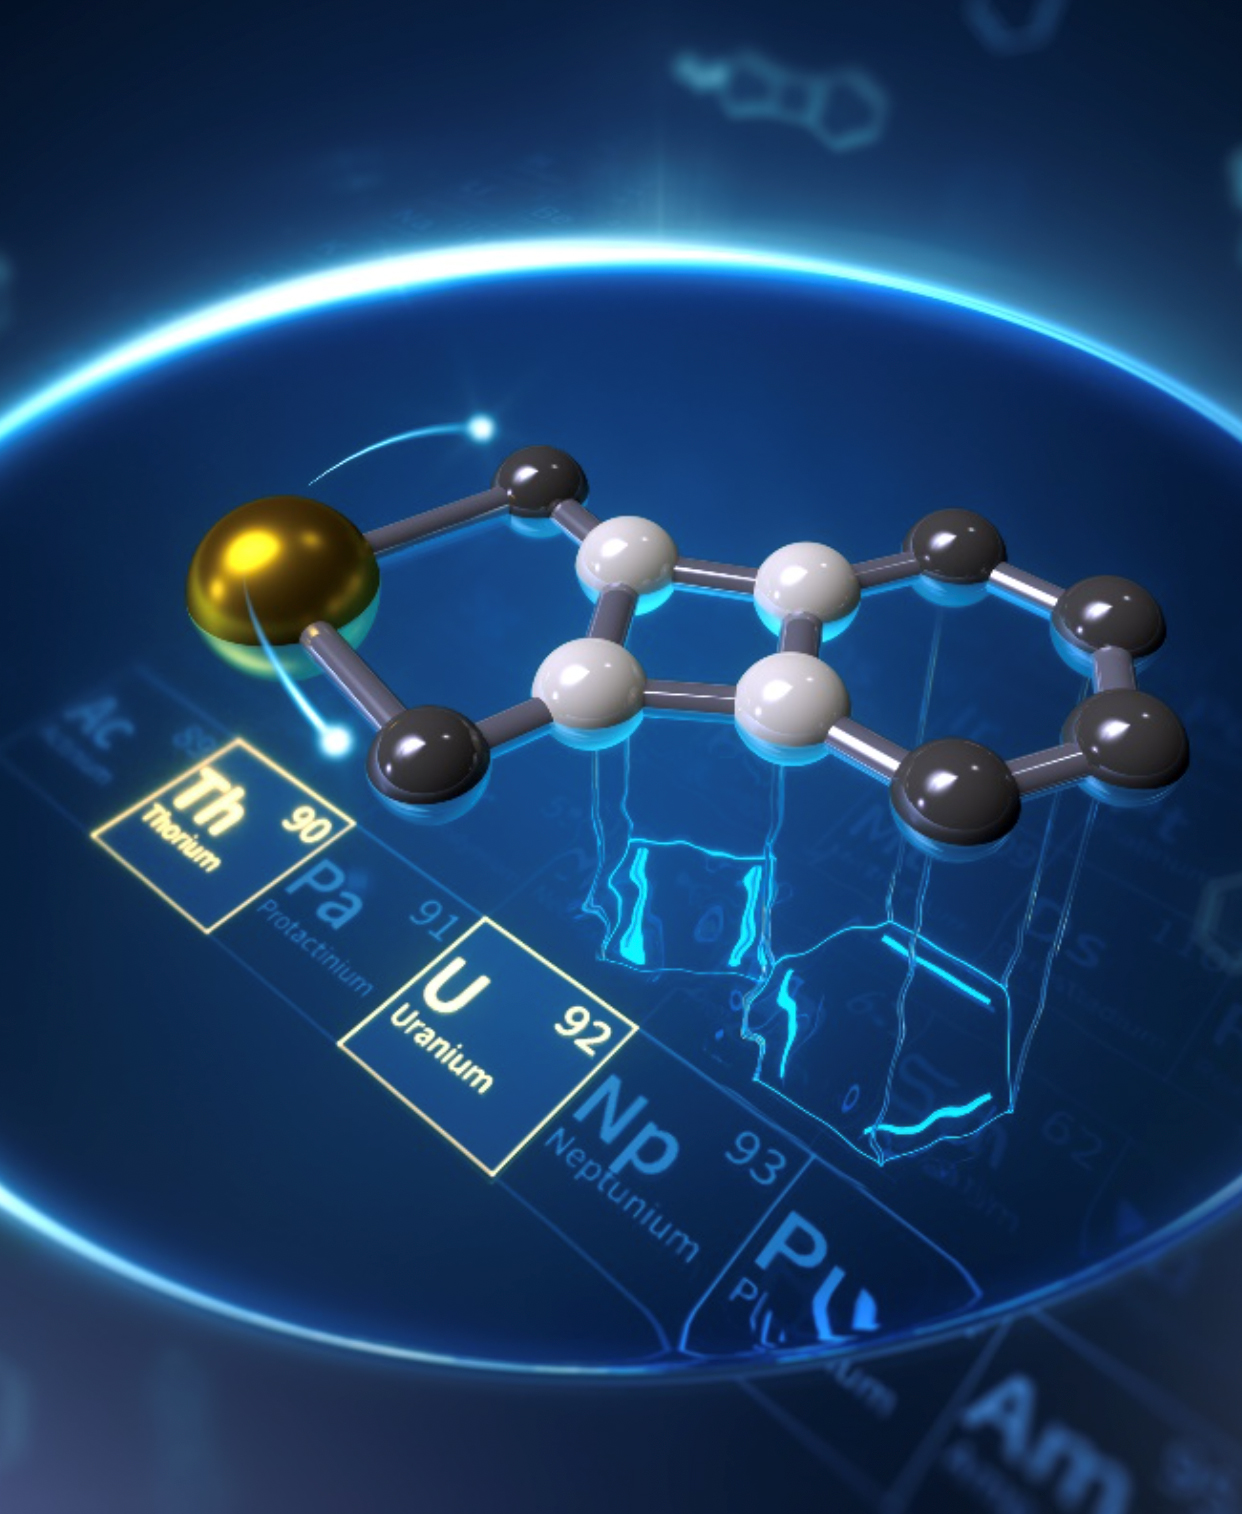 A dual aromatic-antiaromatic molecule on a blue background.